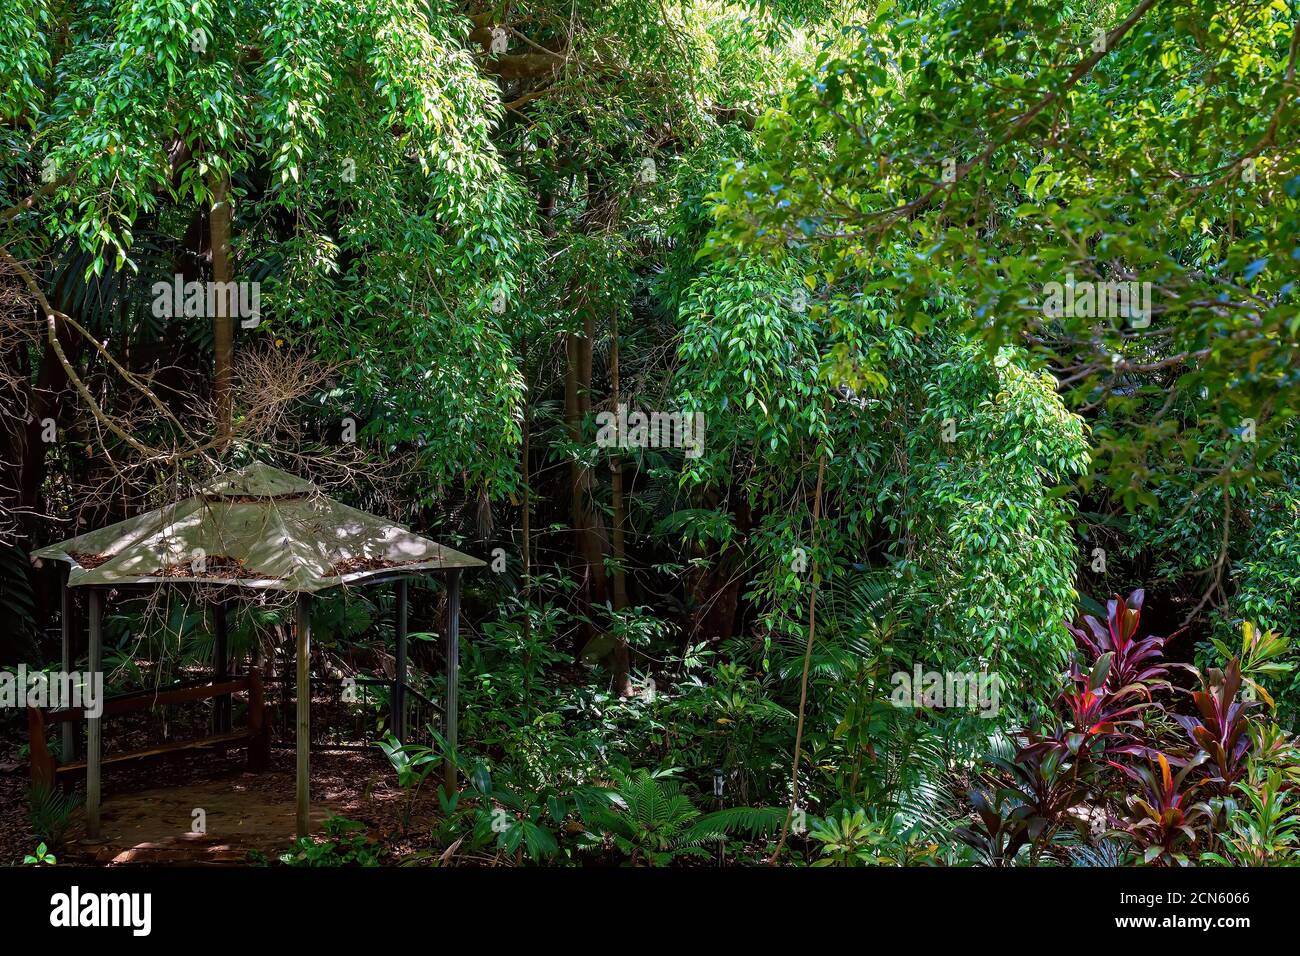 An overgrown country garden with a shade house covered in fallen leaves Stock Photo